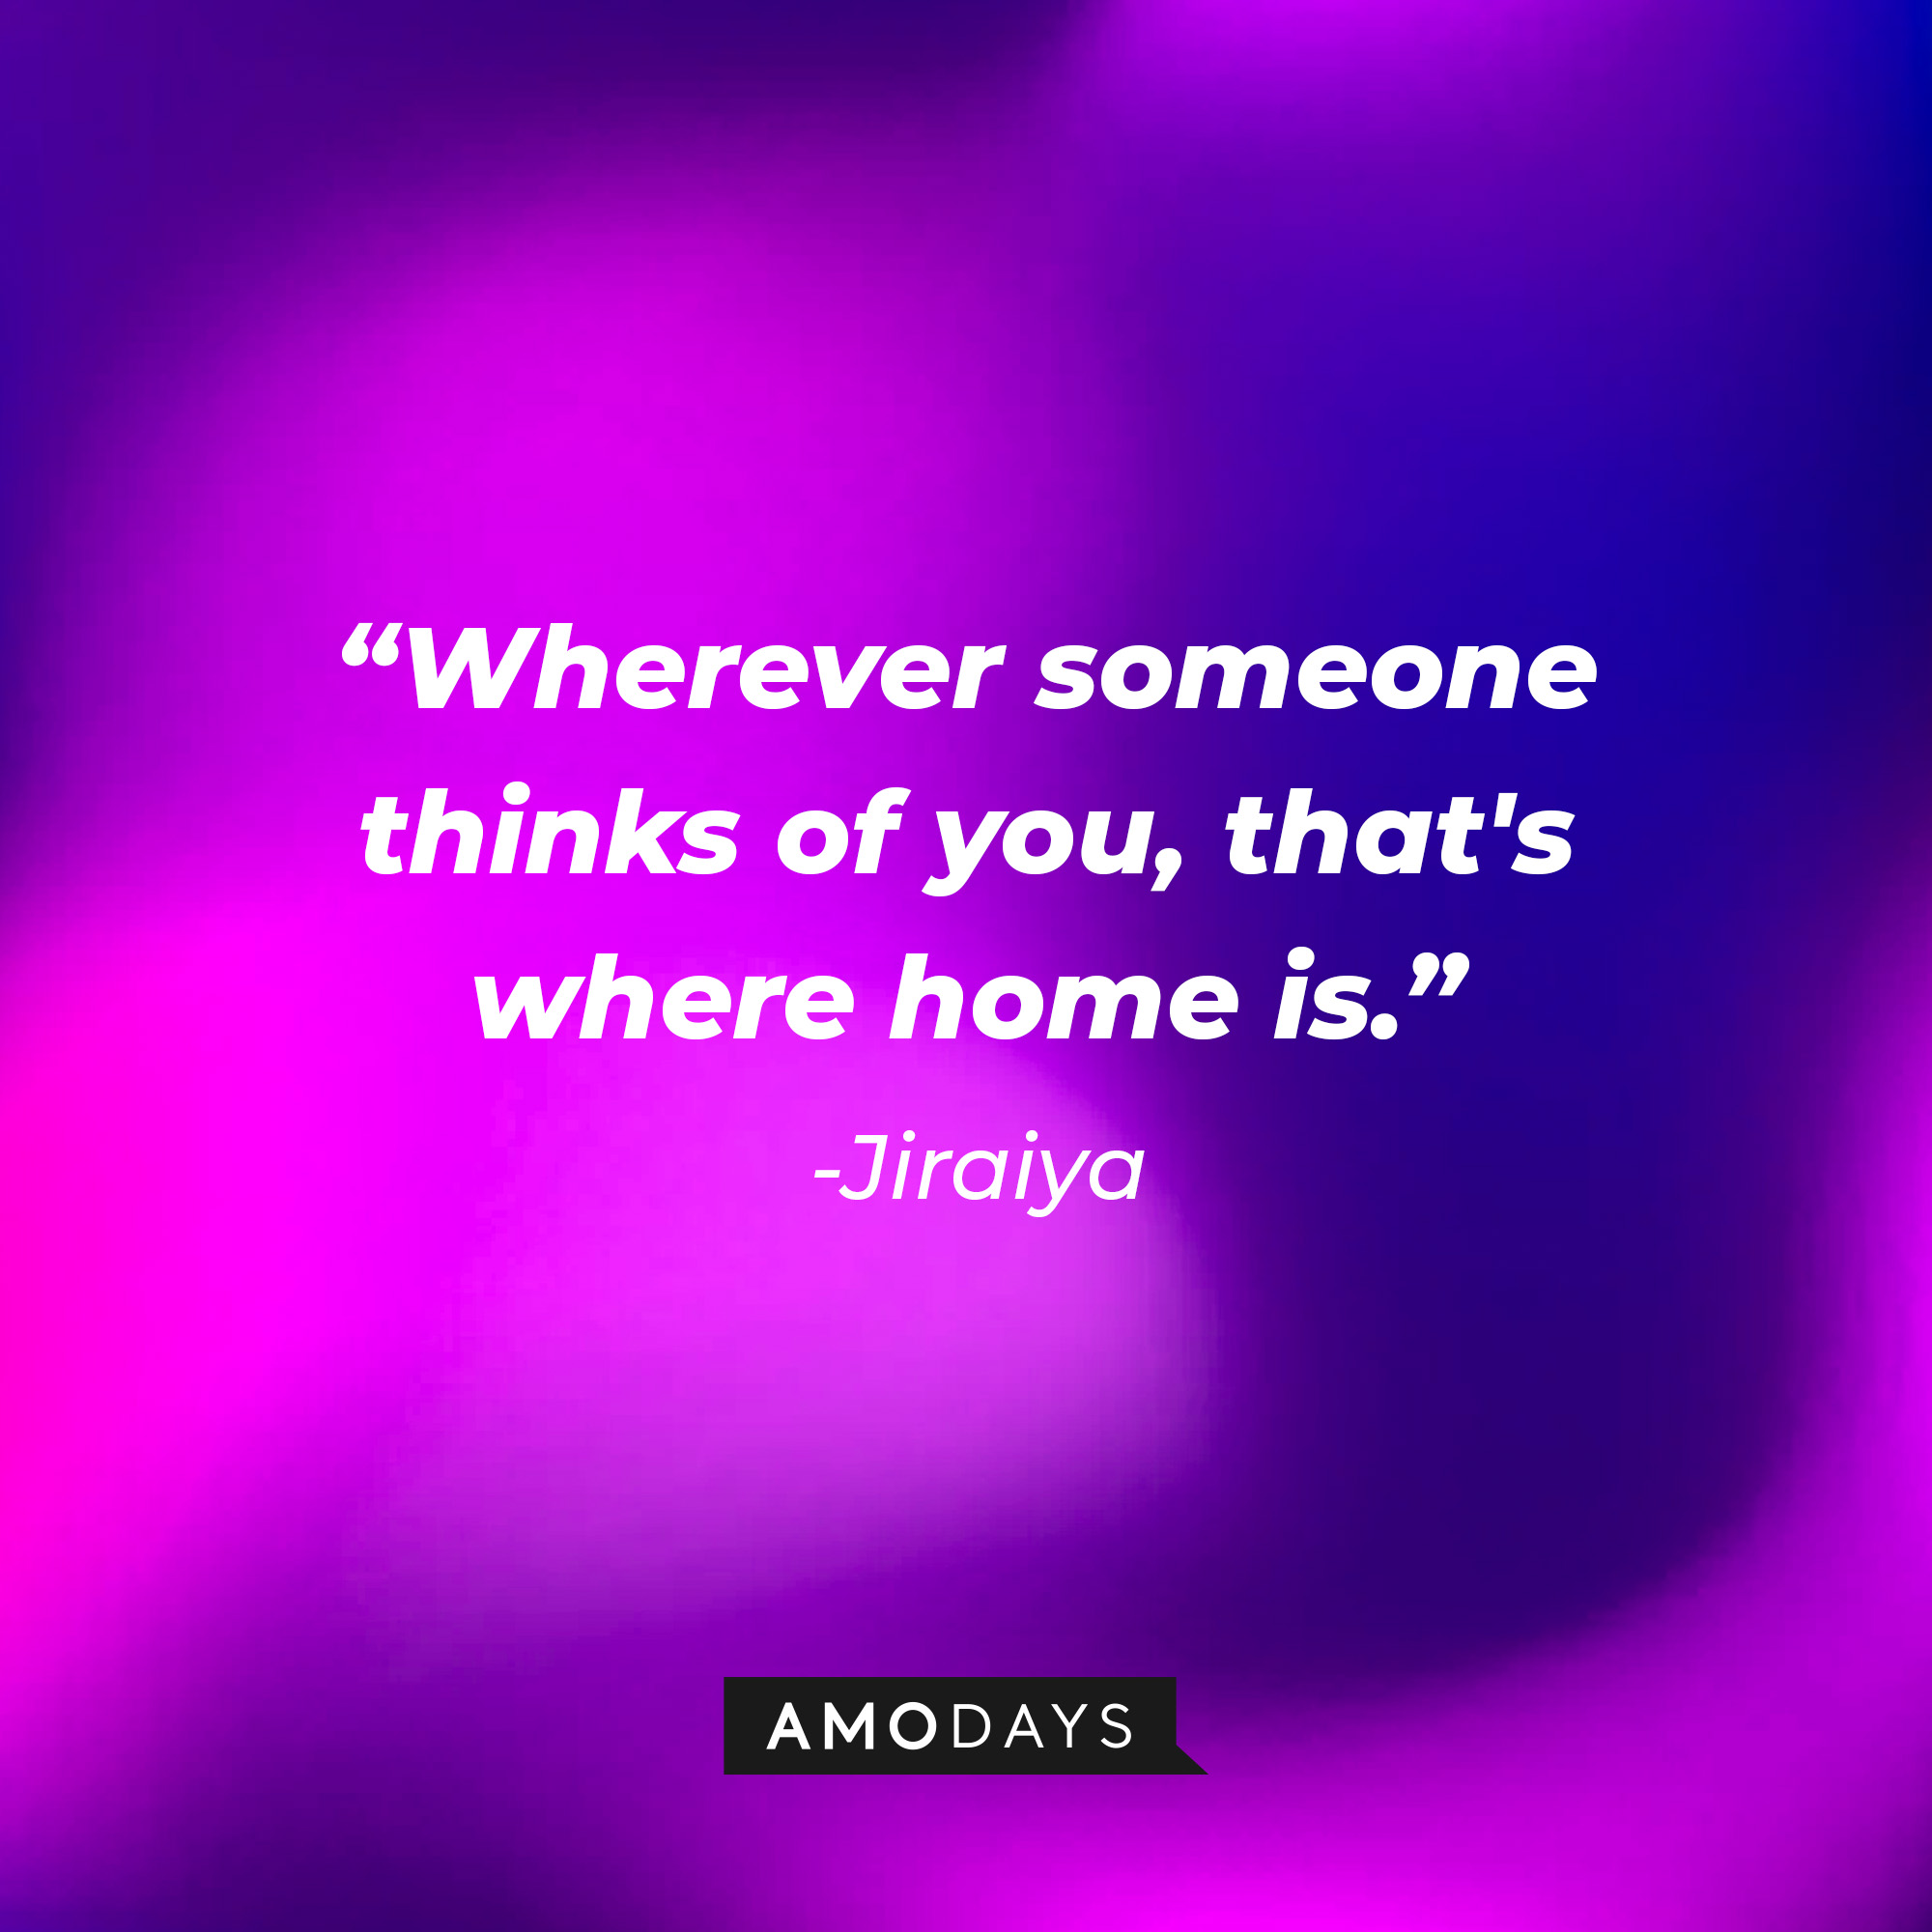 Jiraiya’s quote: "Wherever someone thinks of you, that's where home is." │Source: AmoDays